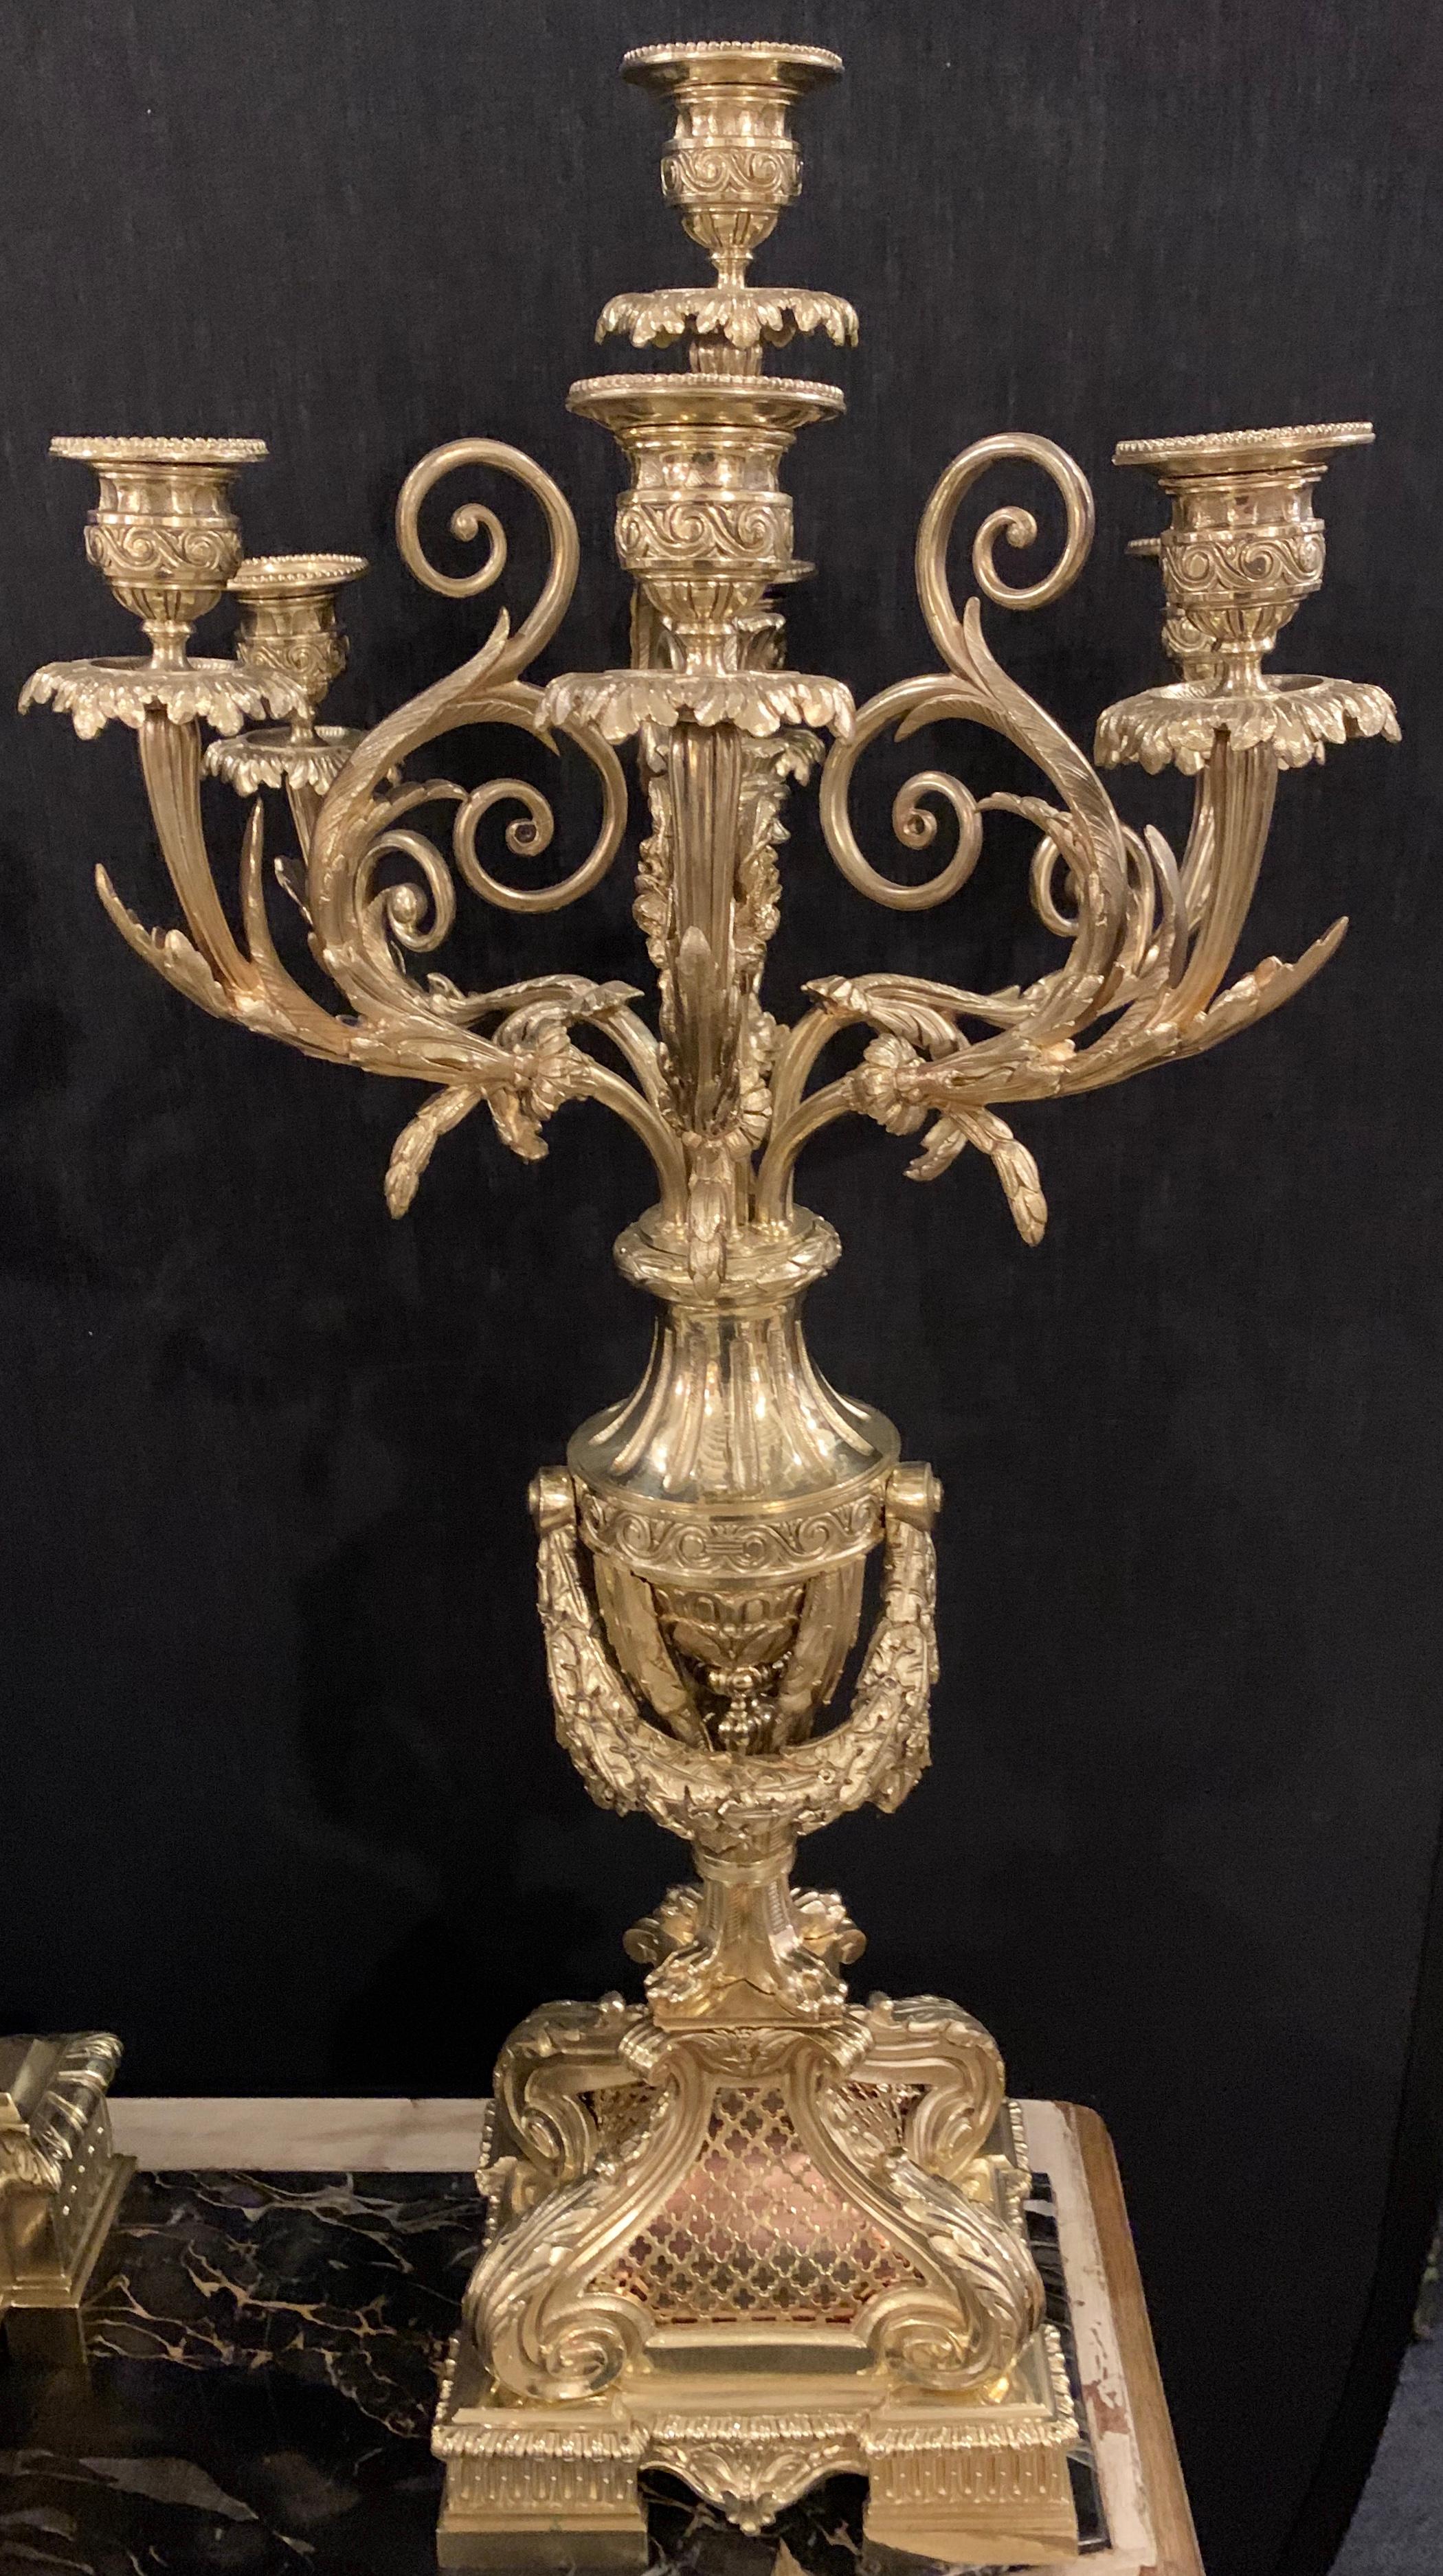 19th century J E Caldwell & Company three-piece Garniture clock set. Pair of candlesticks is large and impressive. Signed and Dated 1882. This fine heavy bronze mounted clock set with garnitures is simply stunning by the renowned J G Caldwell. In